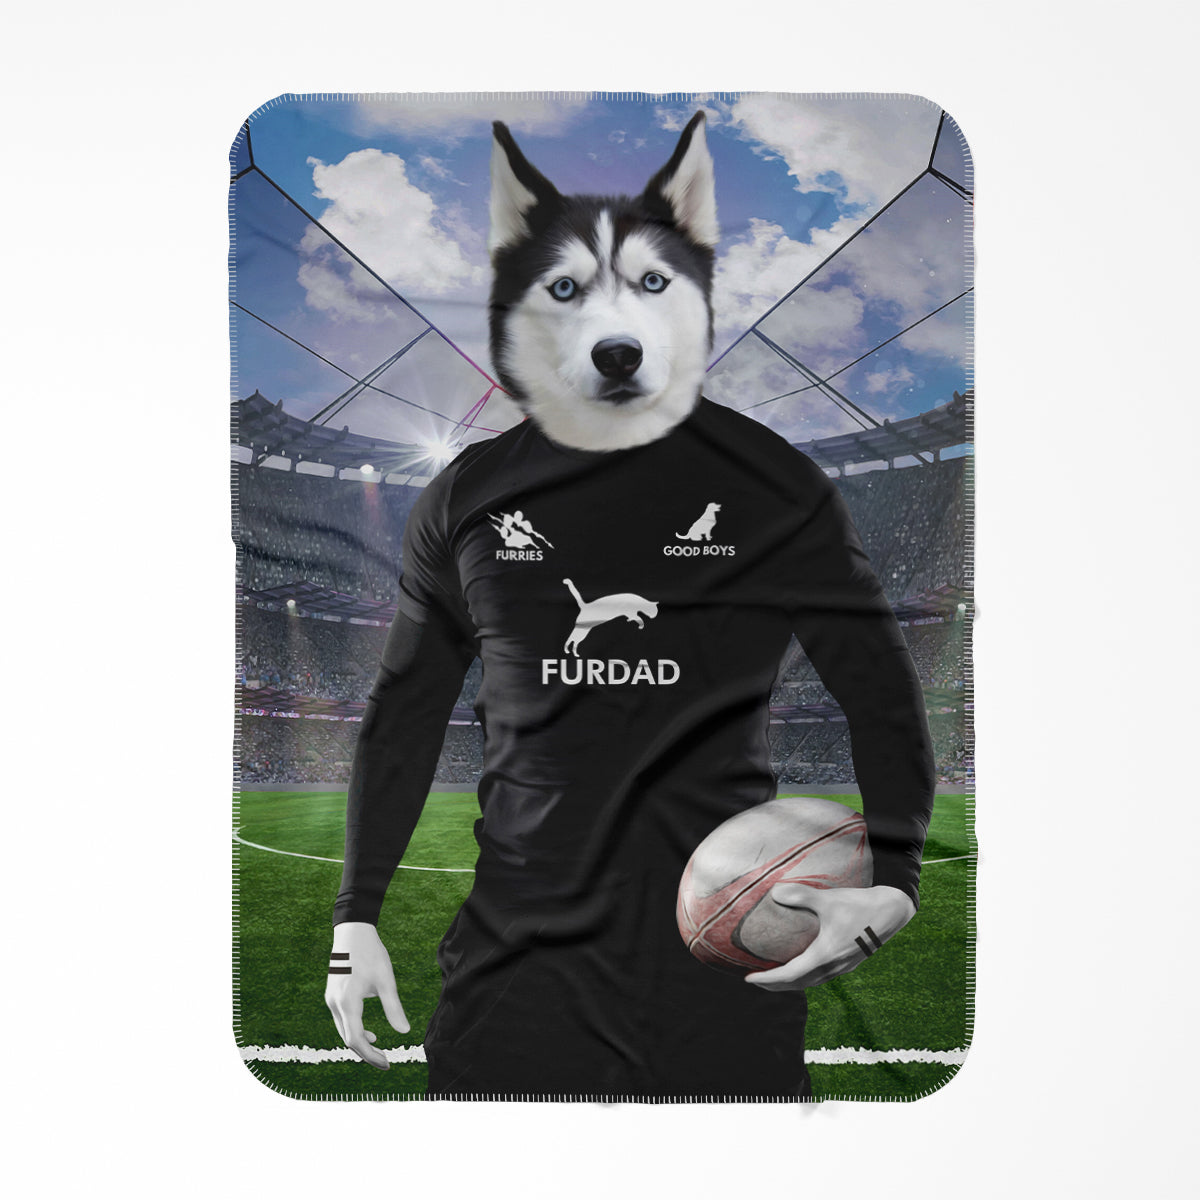 New Zealand Rugby Team: Paw & Glory, pawandglory, Pet Portraits blanket, pet picture on blanket, custom pet blanket, dog photo blanket, blanket with dog on it, dog on blanket, best pet photo blanket